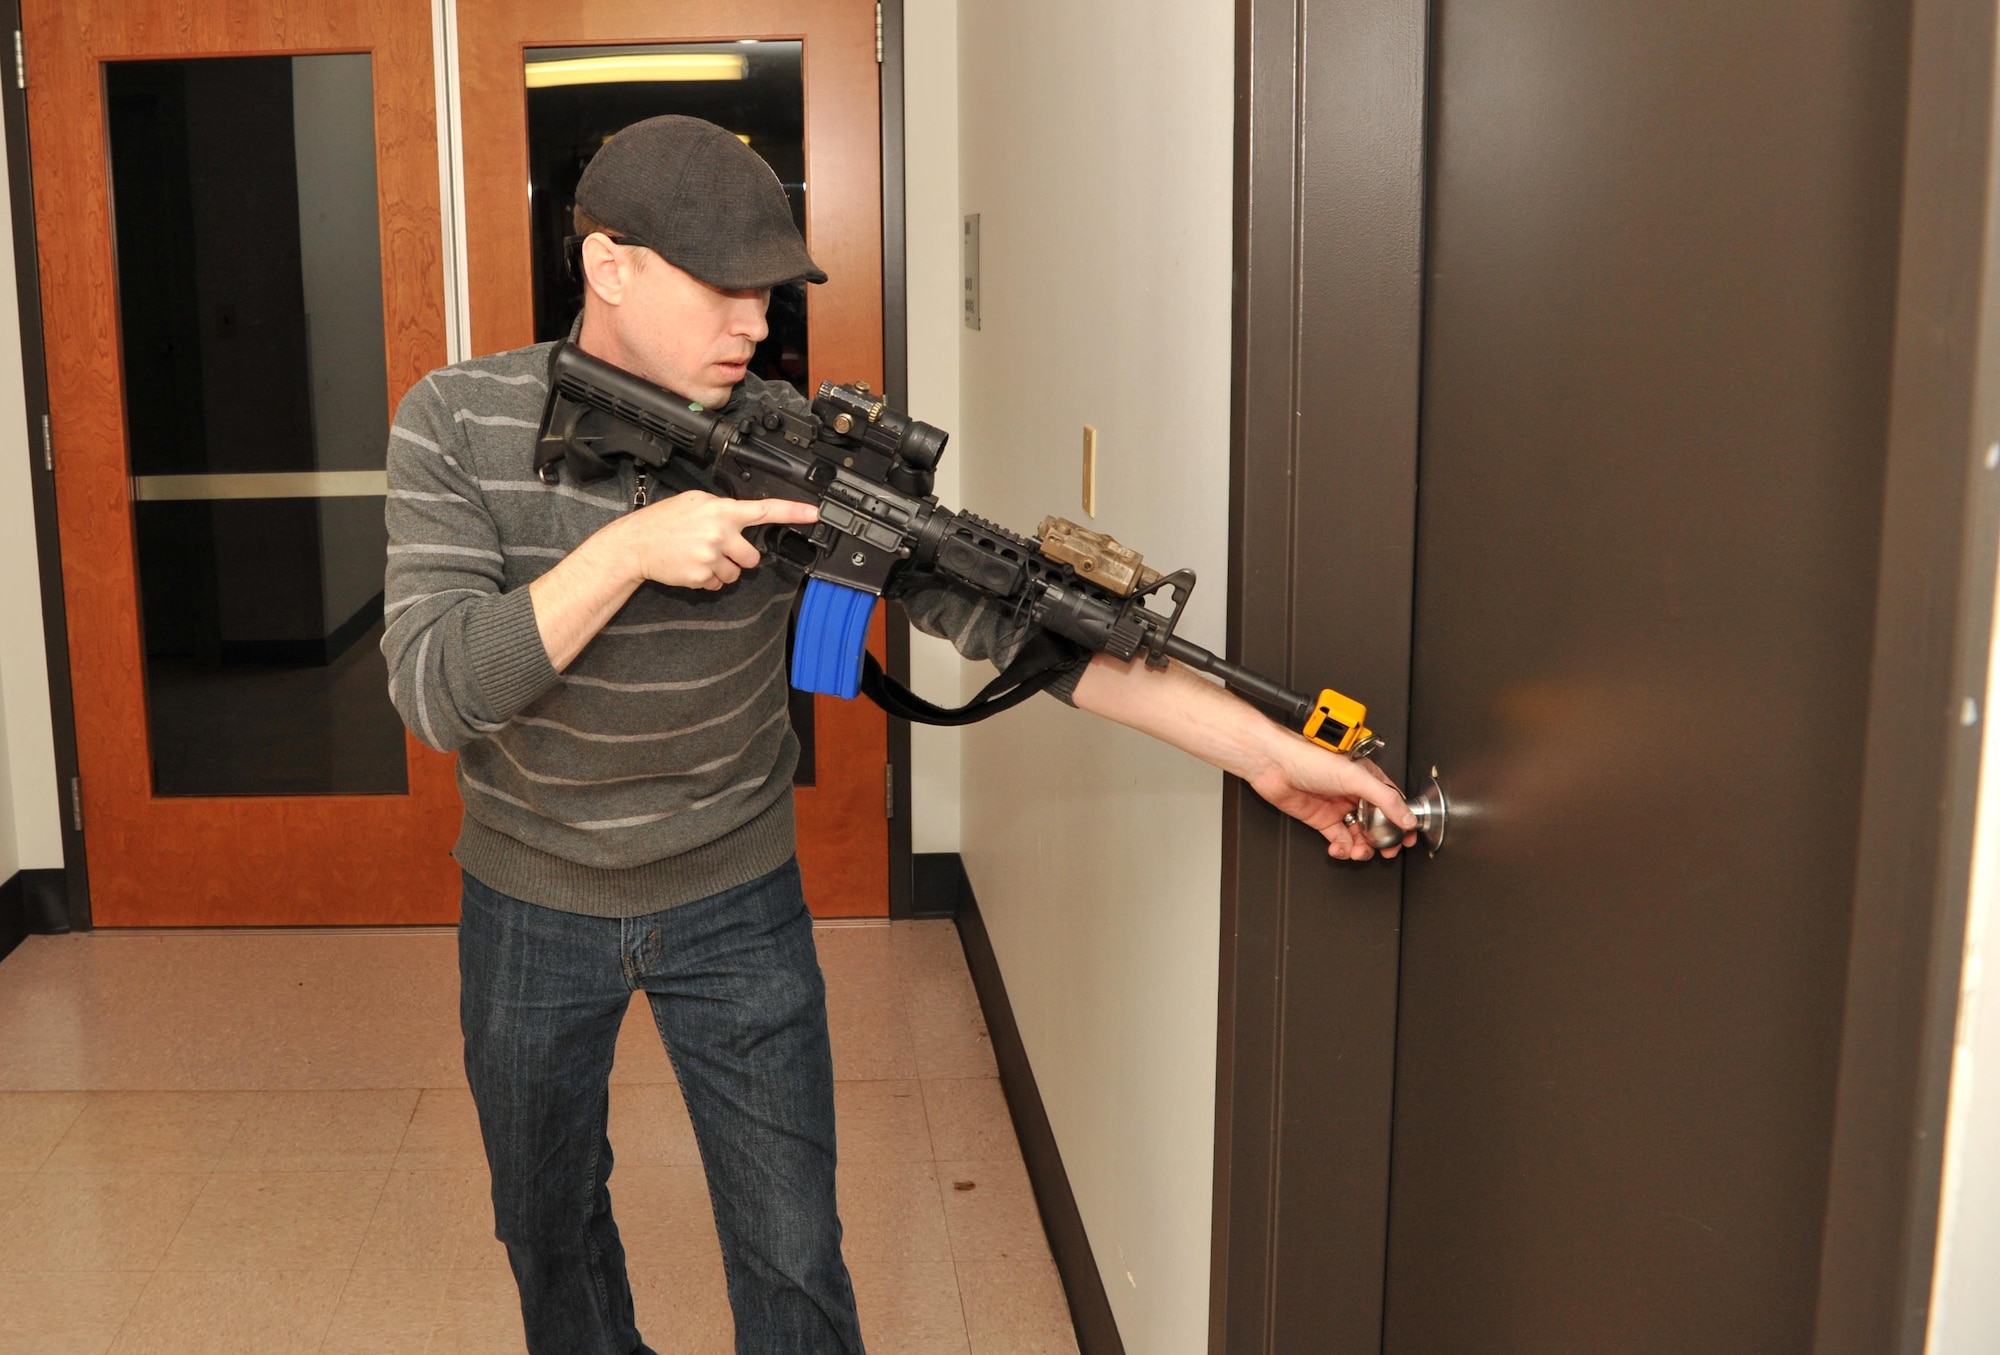 Staff Sgt. Chris Hall, a 9th Security Forces member, plays the role of an active shooter during an exercise Jan. 13, 2017 at Beale Air Force Base, California. The protocol during an active shooter scenario is to lock all doors and turn of lights in order to remain hidden. (U.S. Air Force photo/Airman Tristan D. Viglianco)